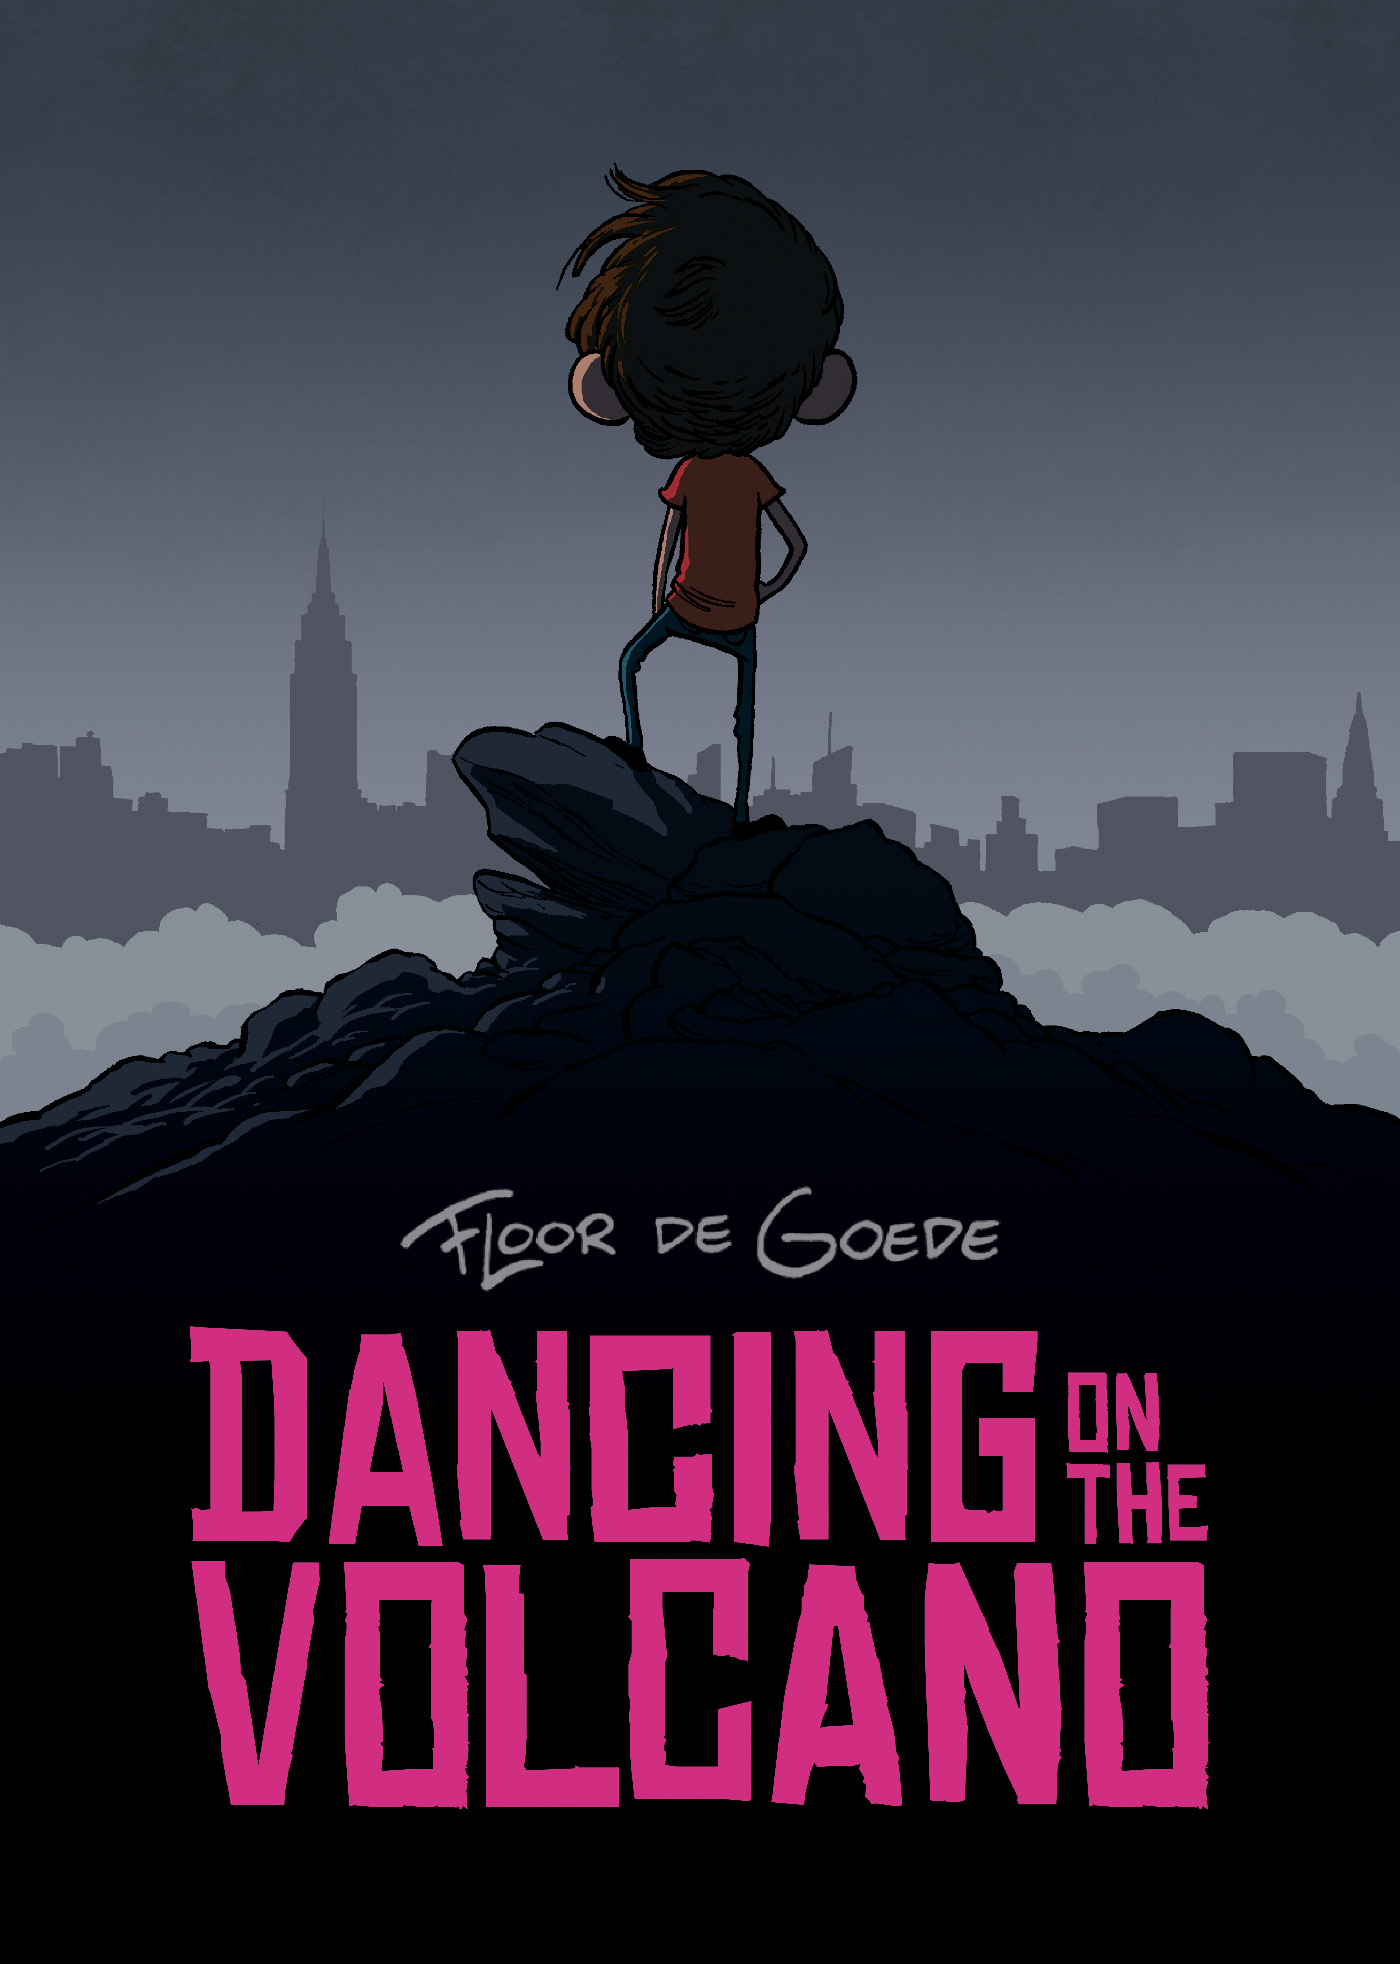 Dancing on the Volcano Graphic Novel